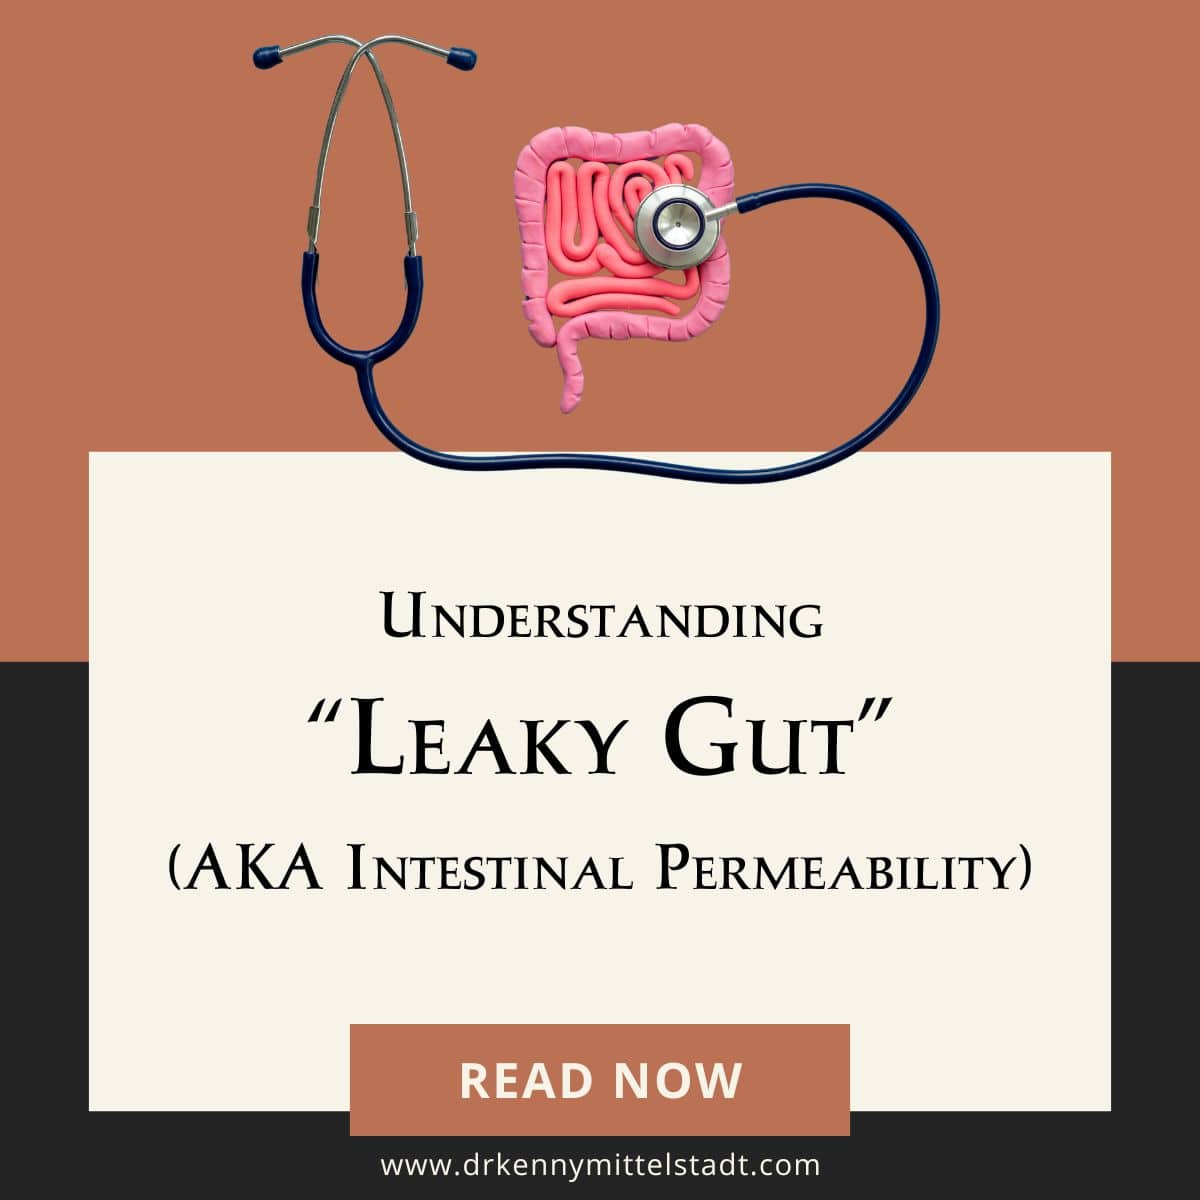 This image shows the title of the blog post, "Understanding Leaky Gut (AKA Intestinal Permeability)" with a picture of a stethoscope over a graphic of human intestines.